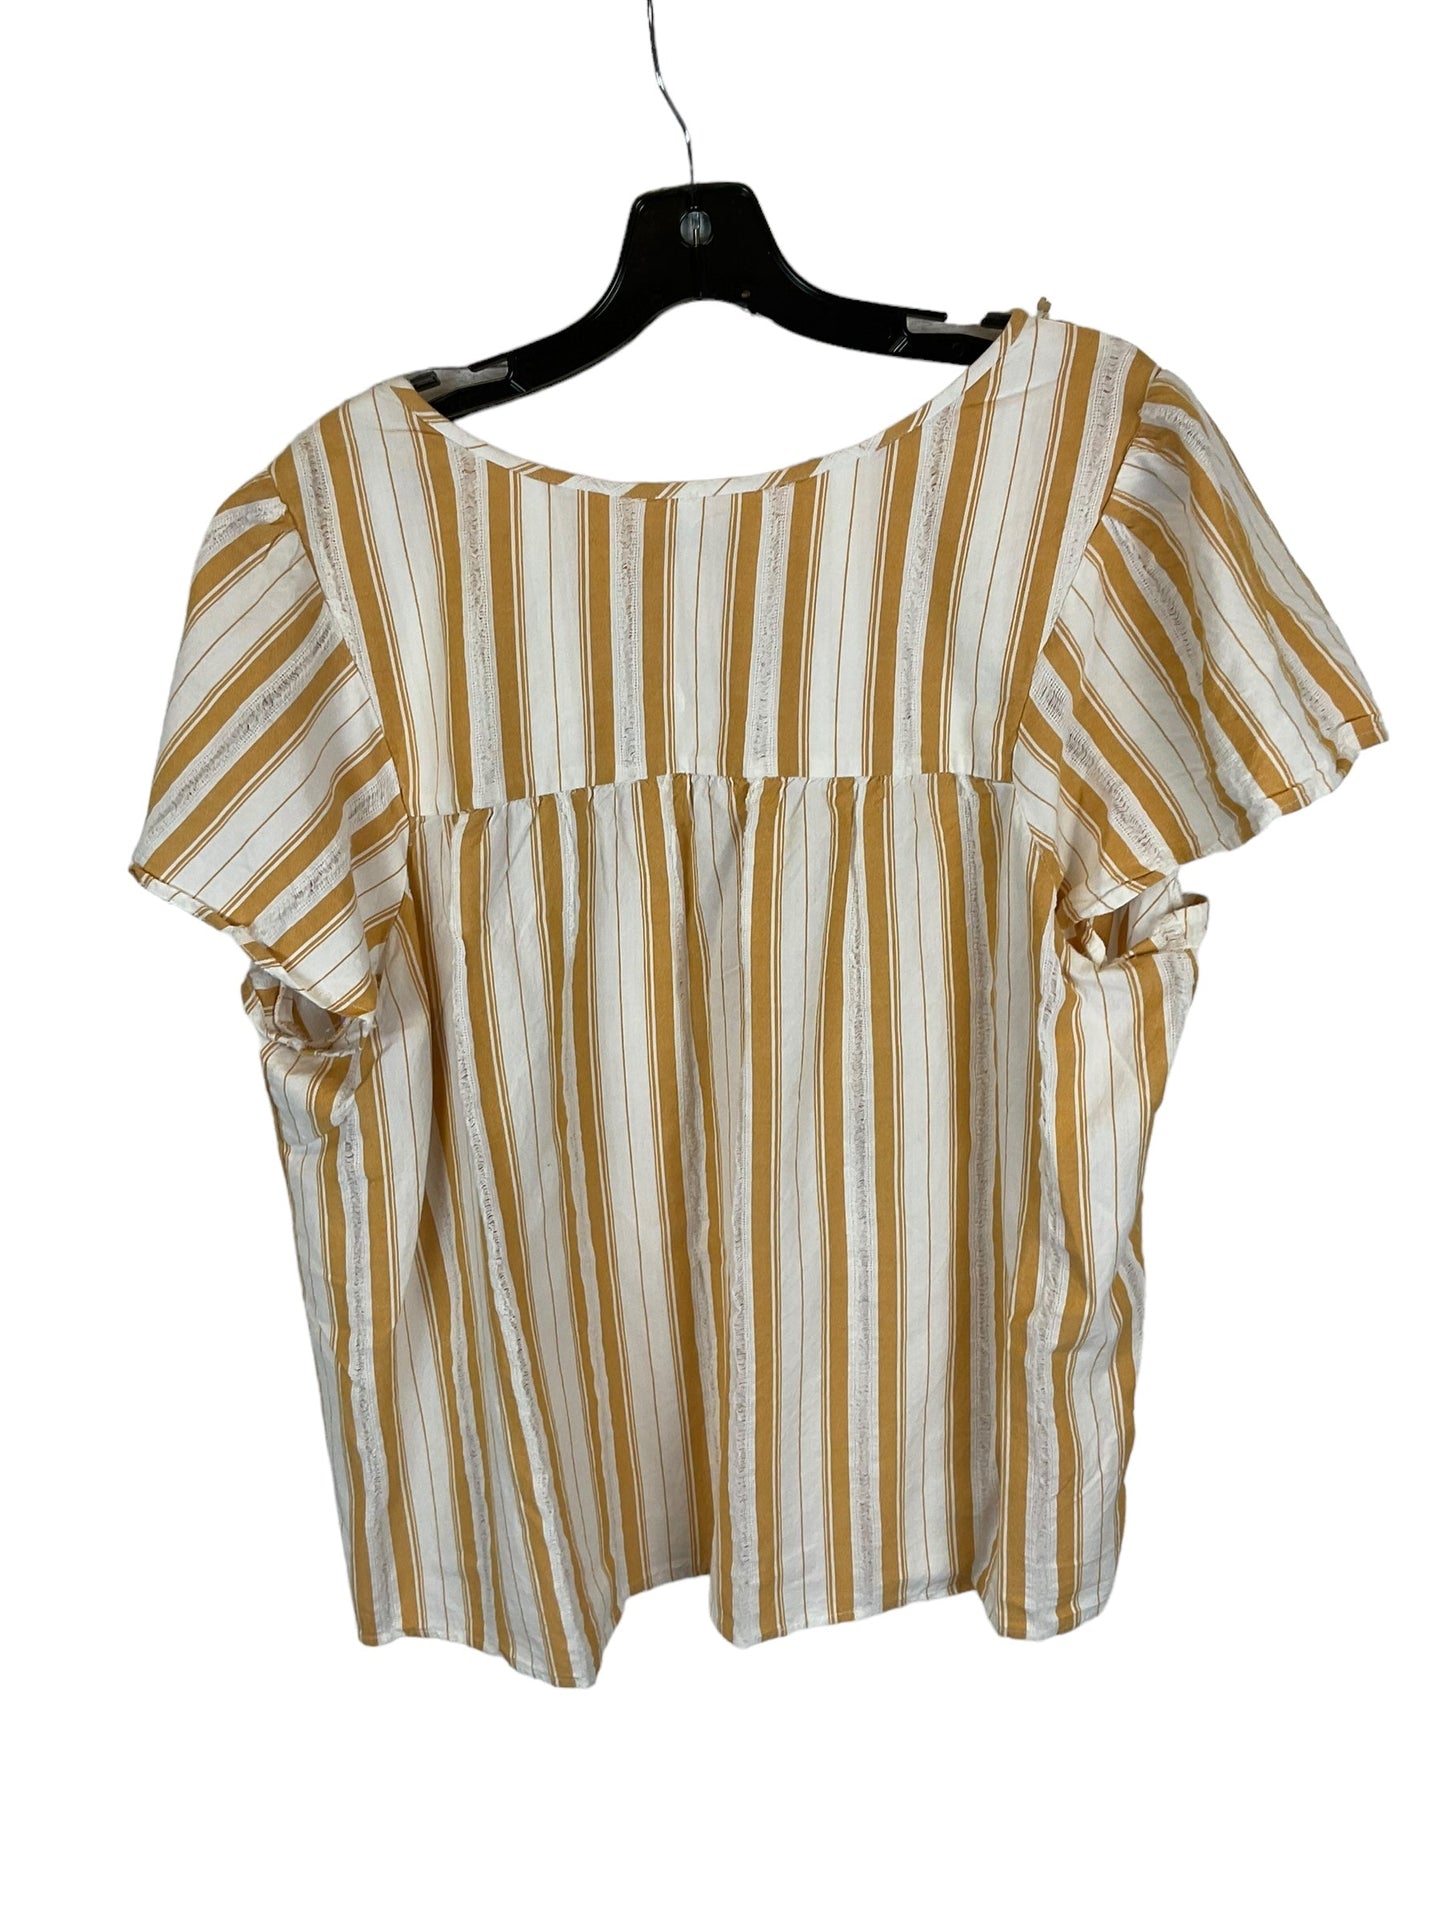 Yellow Top Short Sleeve New Directions, Size 2x